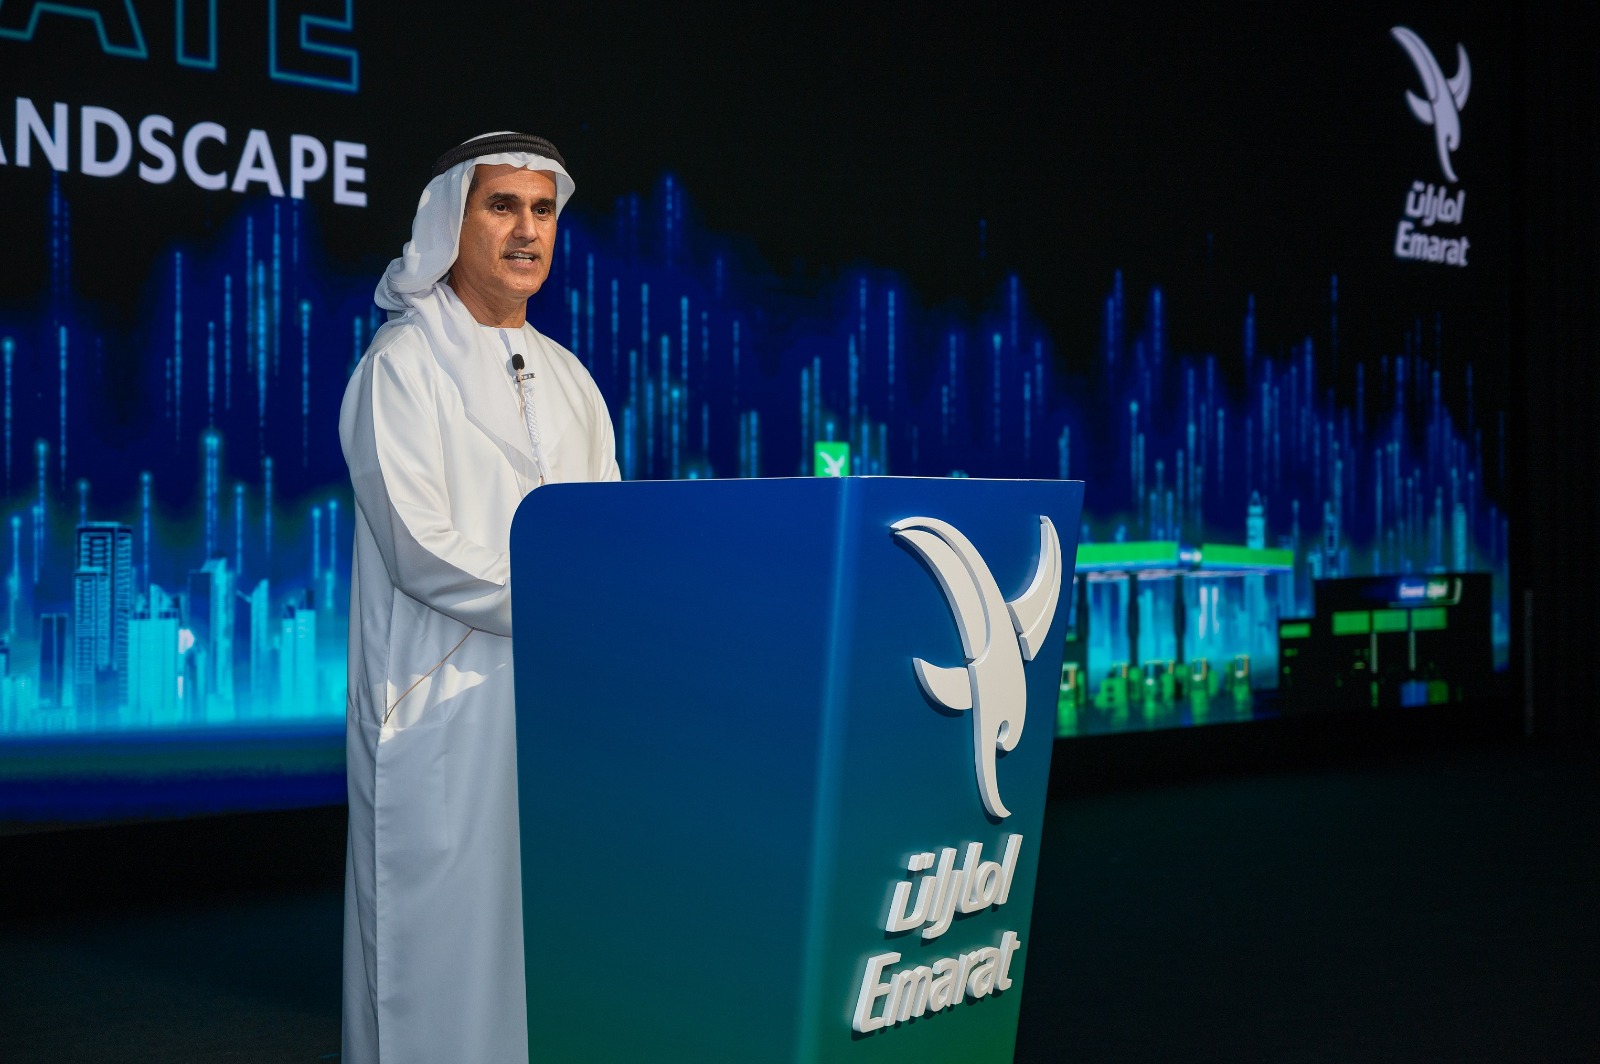 Emarat Launches ‘Project Landmark’ for Naming Rights to Service Stations in the UAE